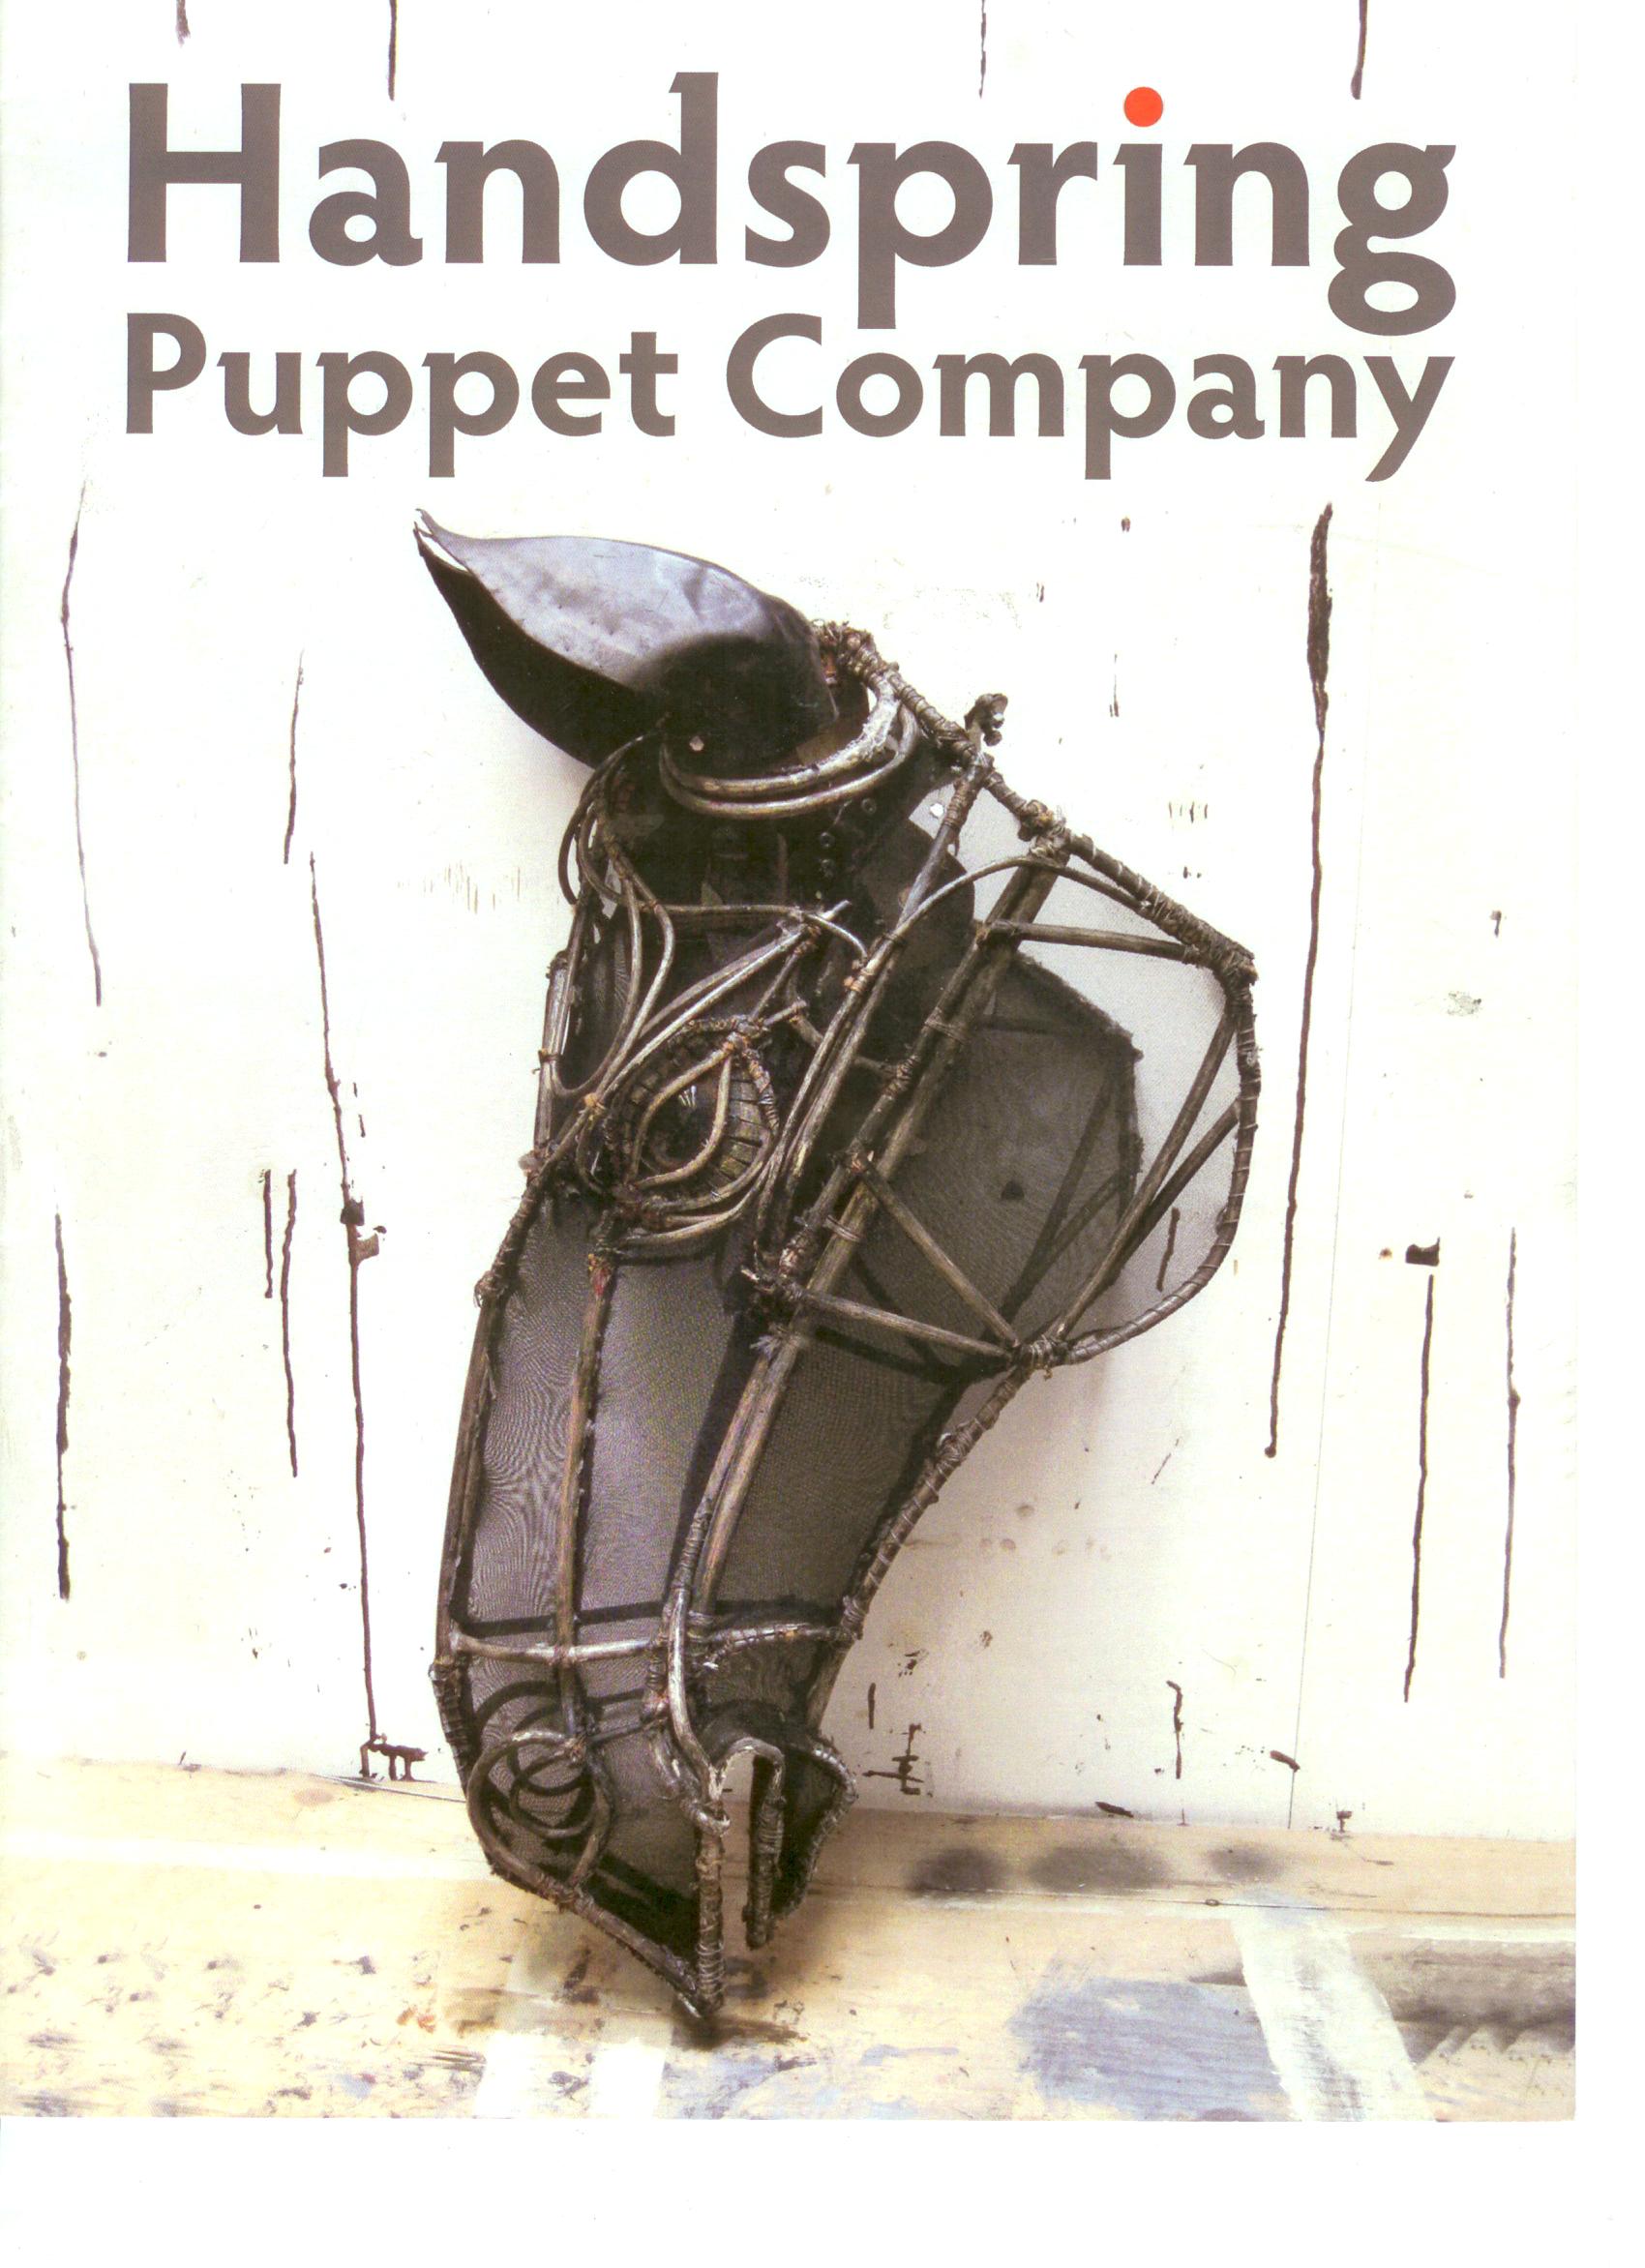 essay about the handspring puppet company